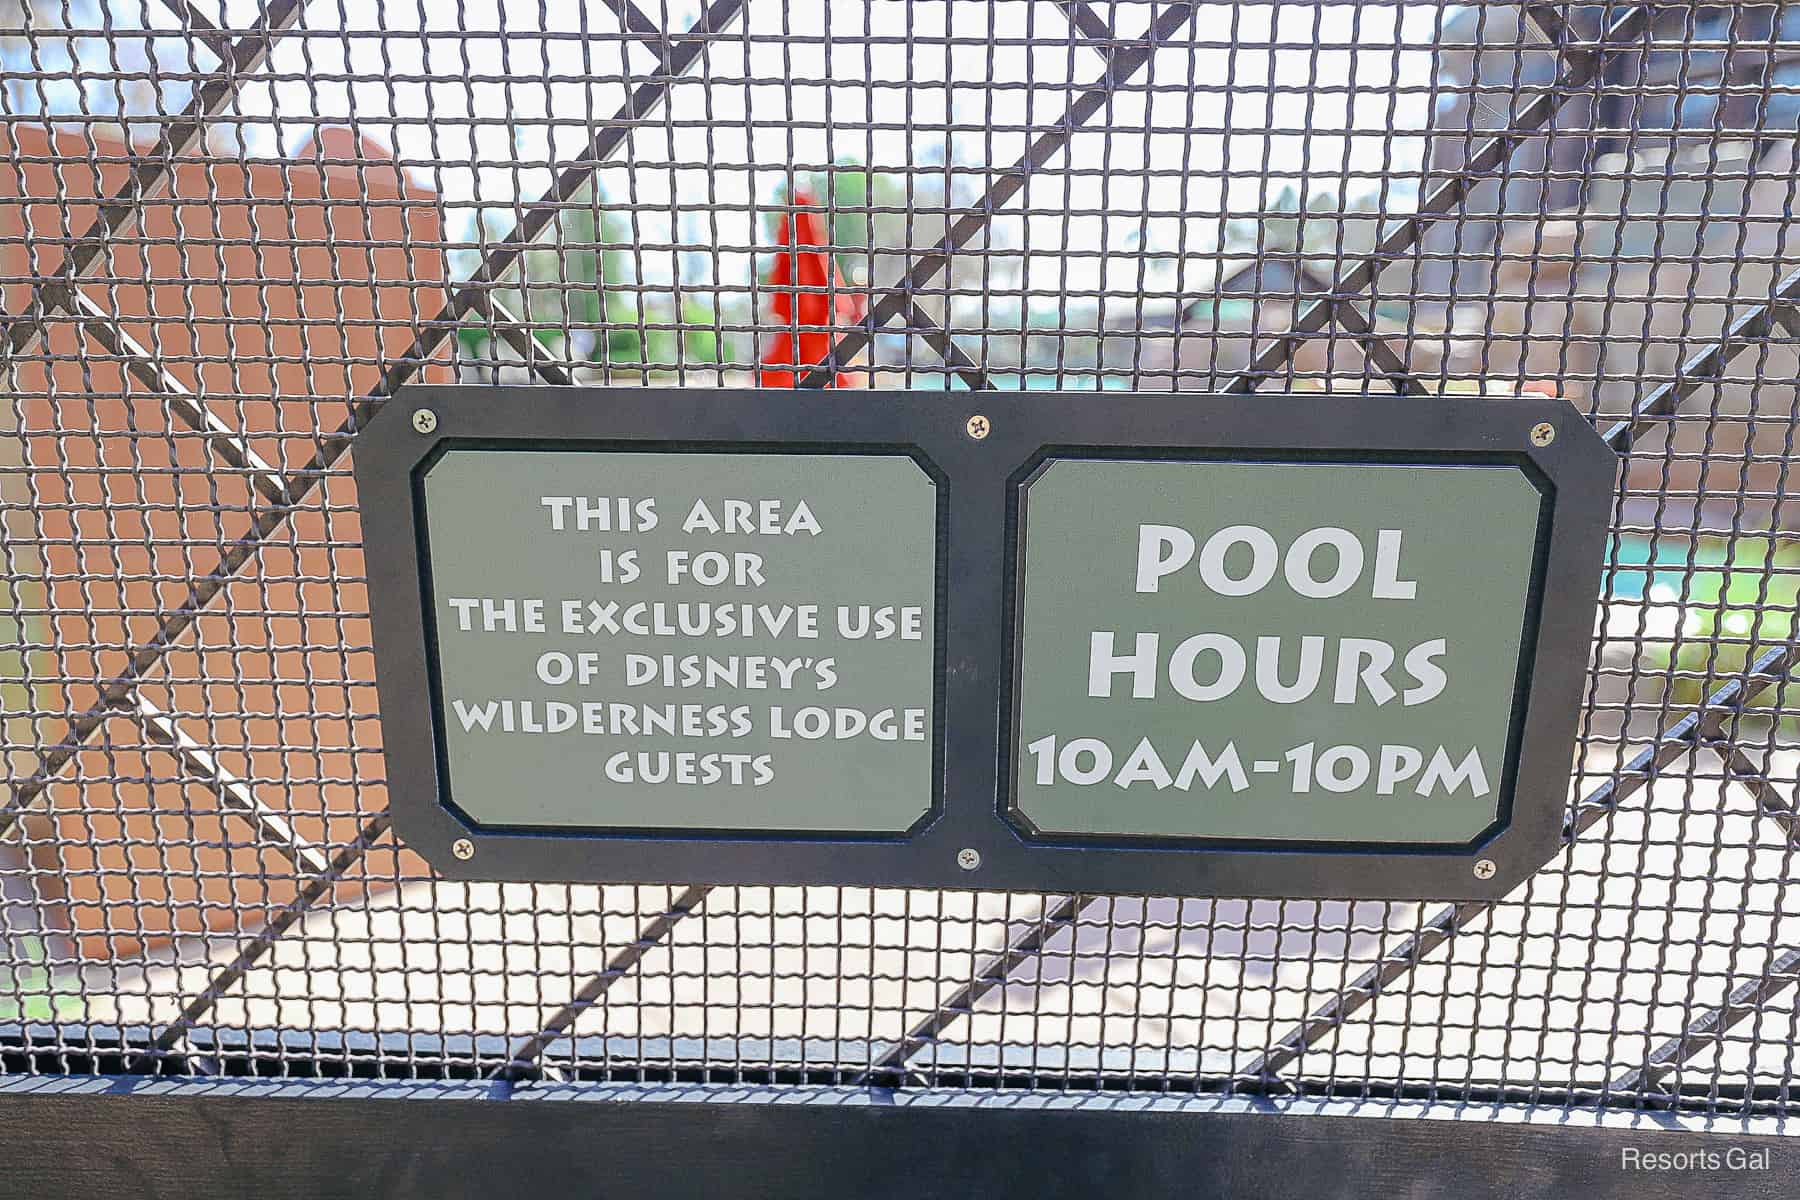 a sign with the posted pool hours and says that the area is exclusive to Disney's Wilderness Lodge guests 